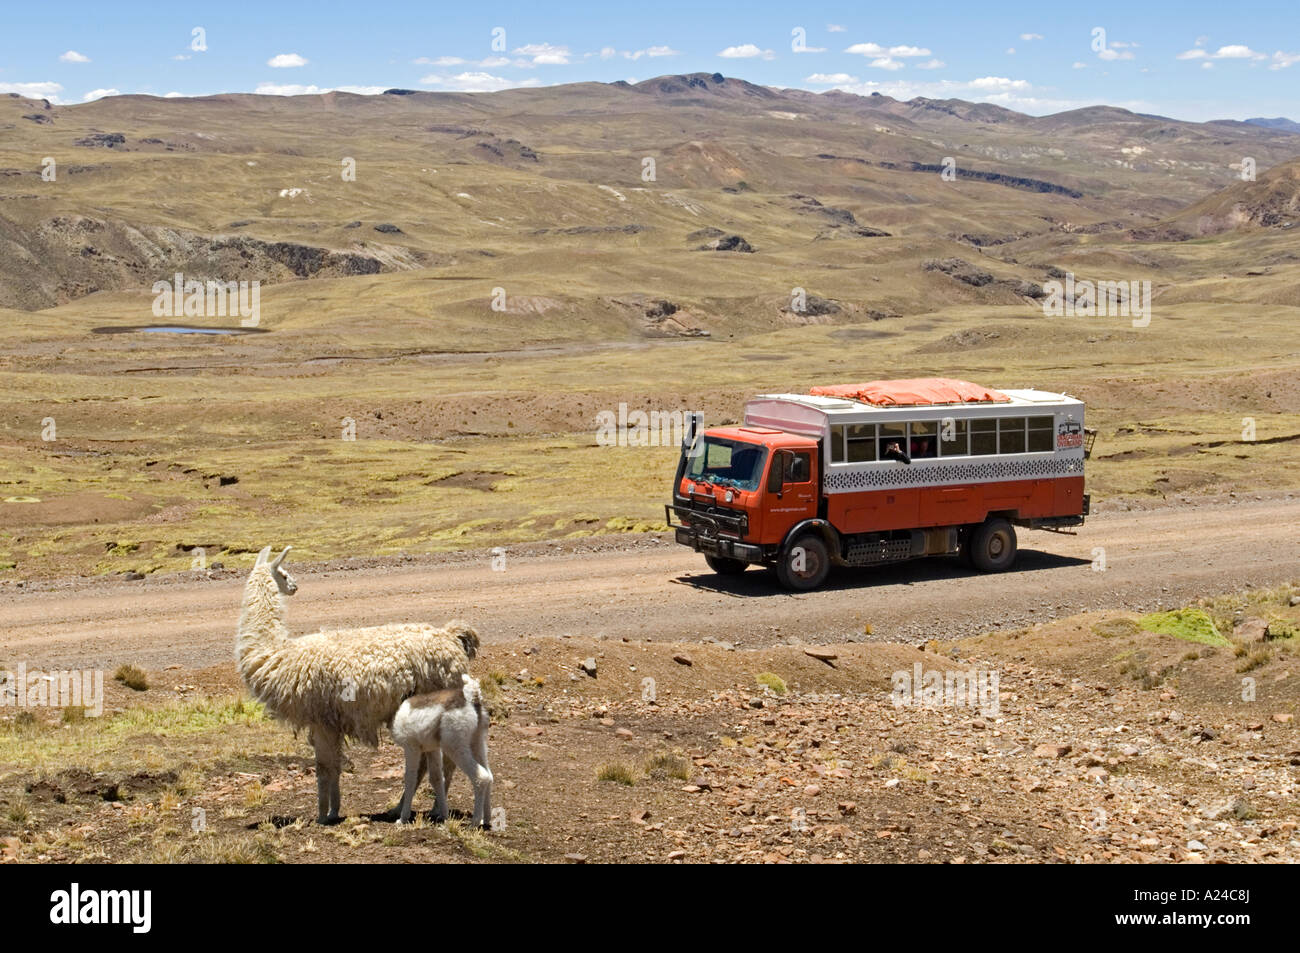 An overland adventure holiday truck stops by the road so that passengers can take a photograph of a mother and baby Alpaca. Stock Photo